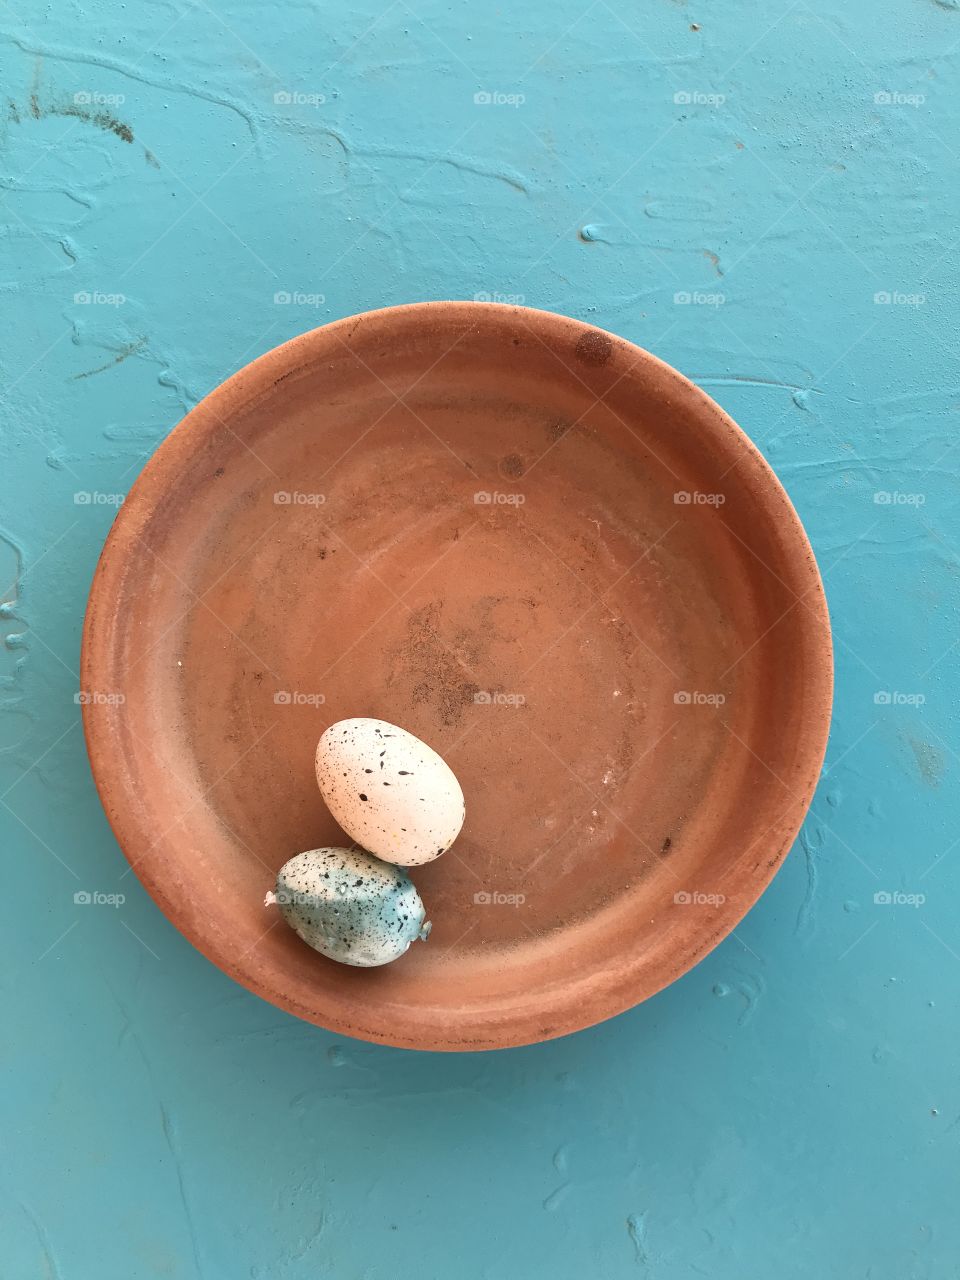 A couple of Robin eggs in a ceramic dish on a light blue background!